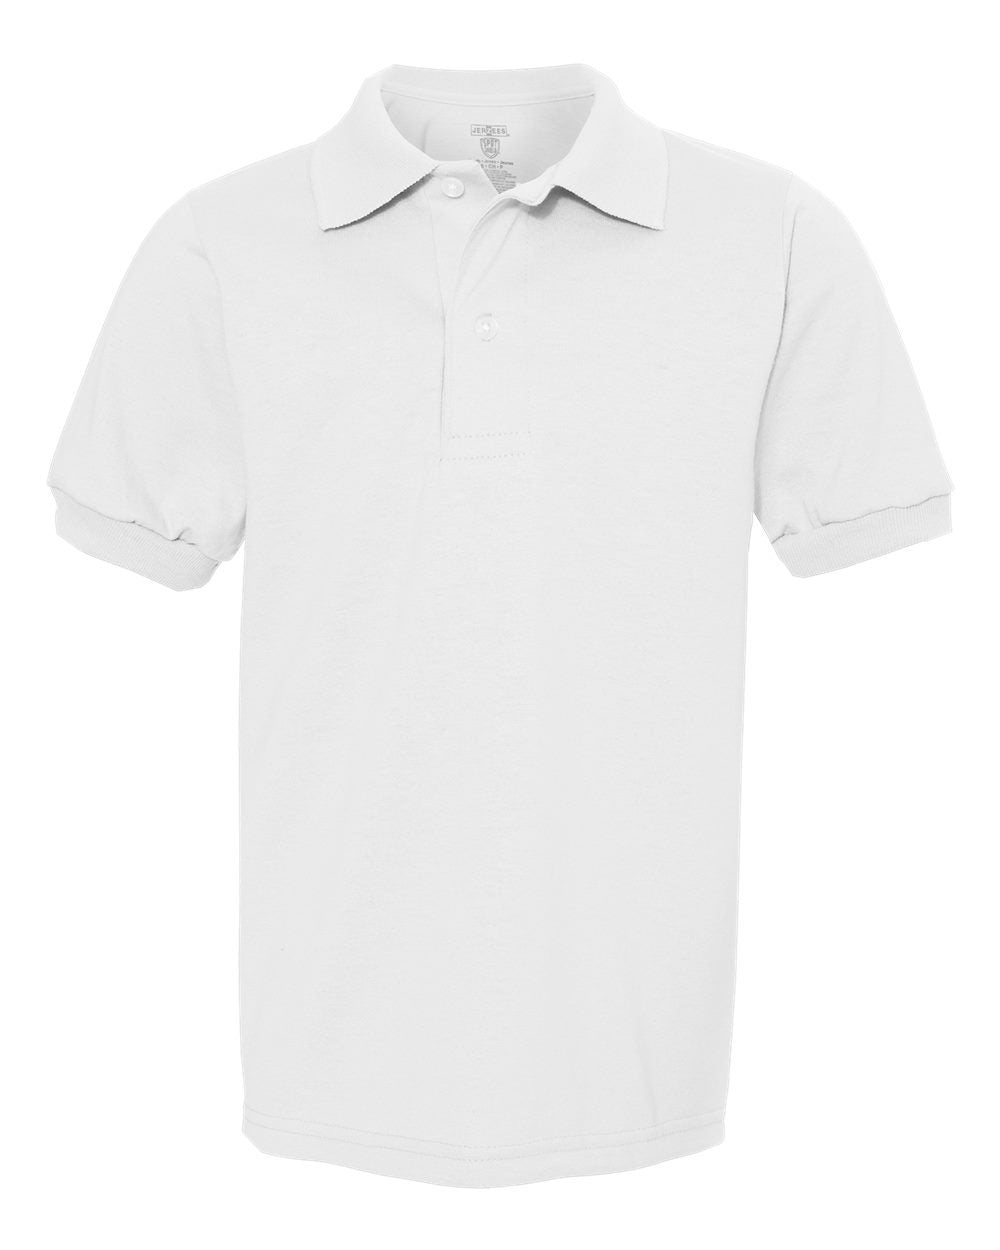 youth jerzees 50/50 polo white